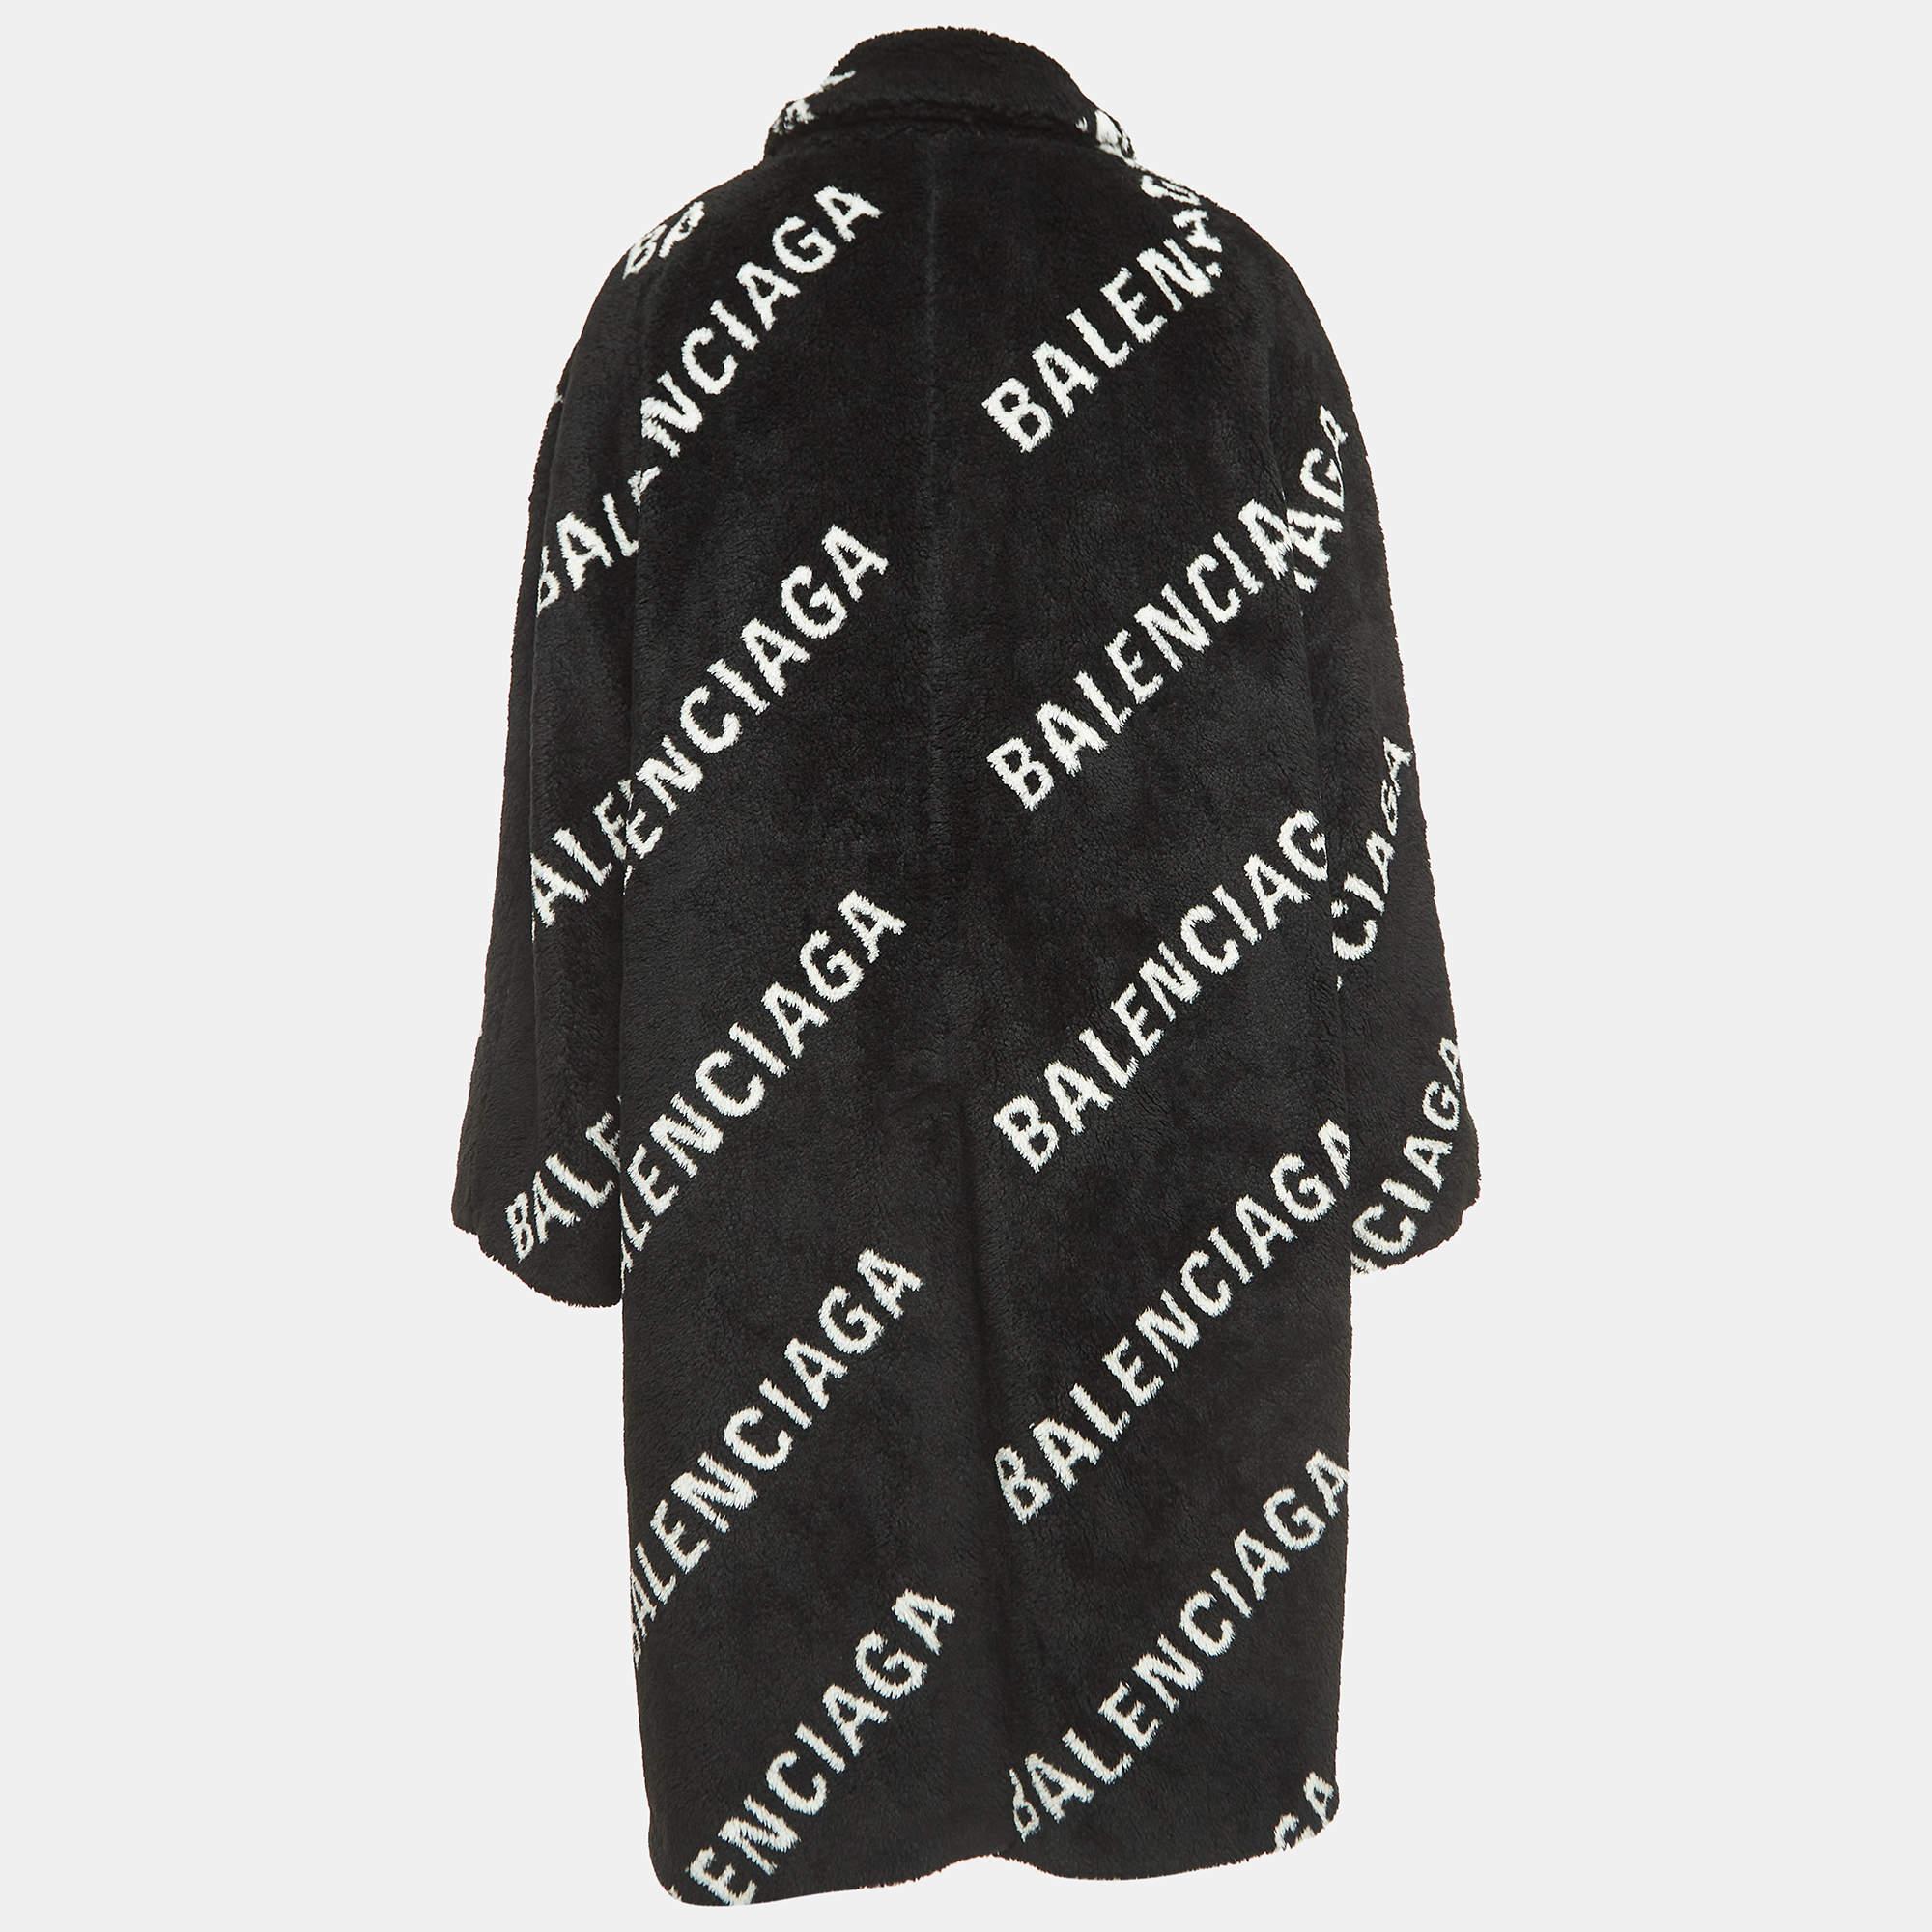 The Balenciaga coat exudes opulence with its plush faux fur and distinctive monogram pattern. Its generous silhouette and sleek black hue make a bold fashion statement, ensuring both warmth and high-end style for the discerning wearer.

Includes: tag